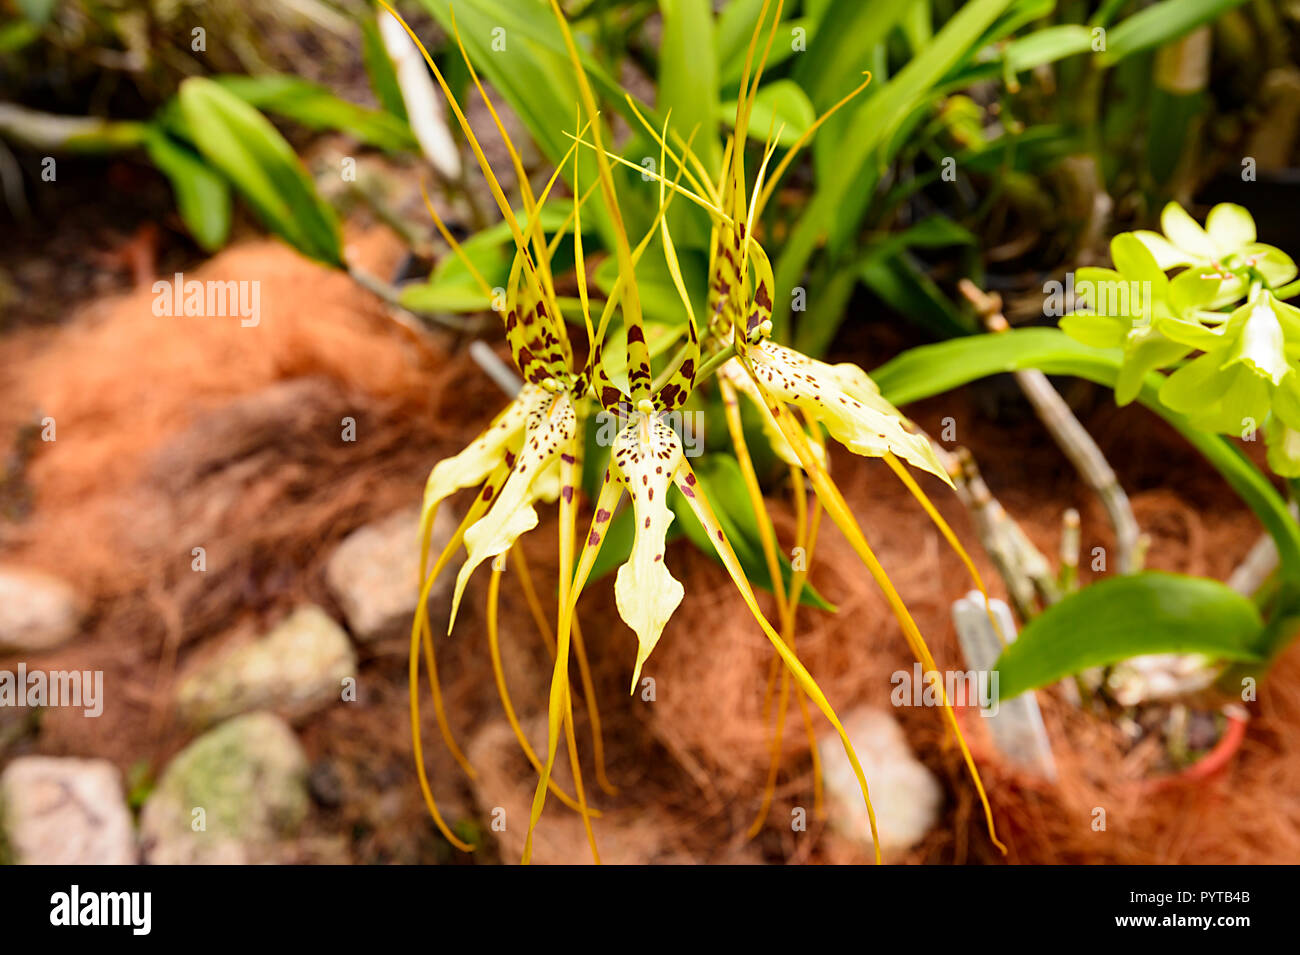 Orchid Brassia longissima x Brassia verrucosa, Onc. Sharry Baby 'Sweet Fragrance', Cairns Botanical Gardens, Cairns, Far North Queensland, FNQ, QLD, A Stock Photo